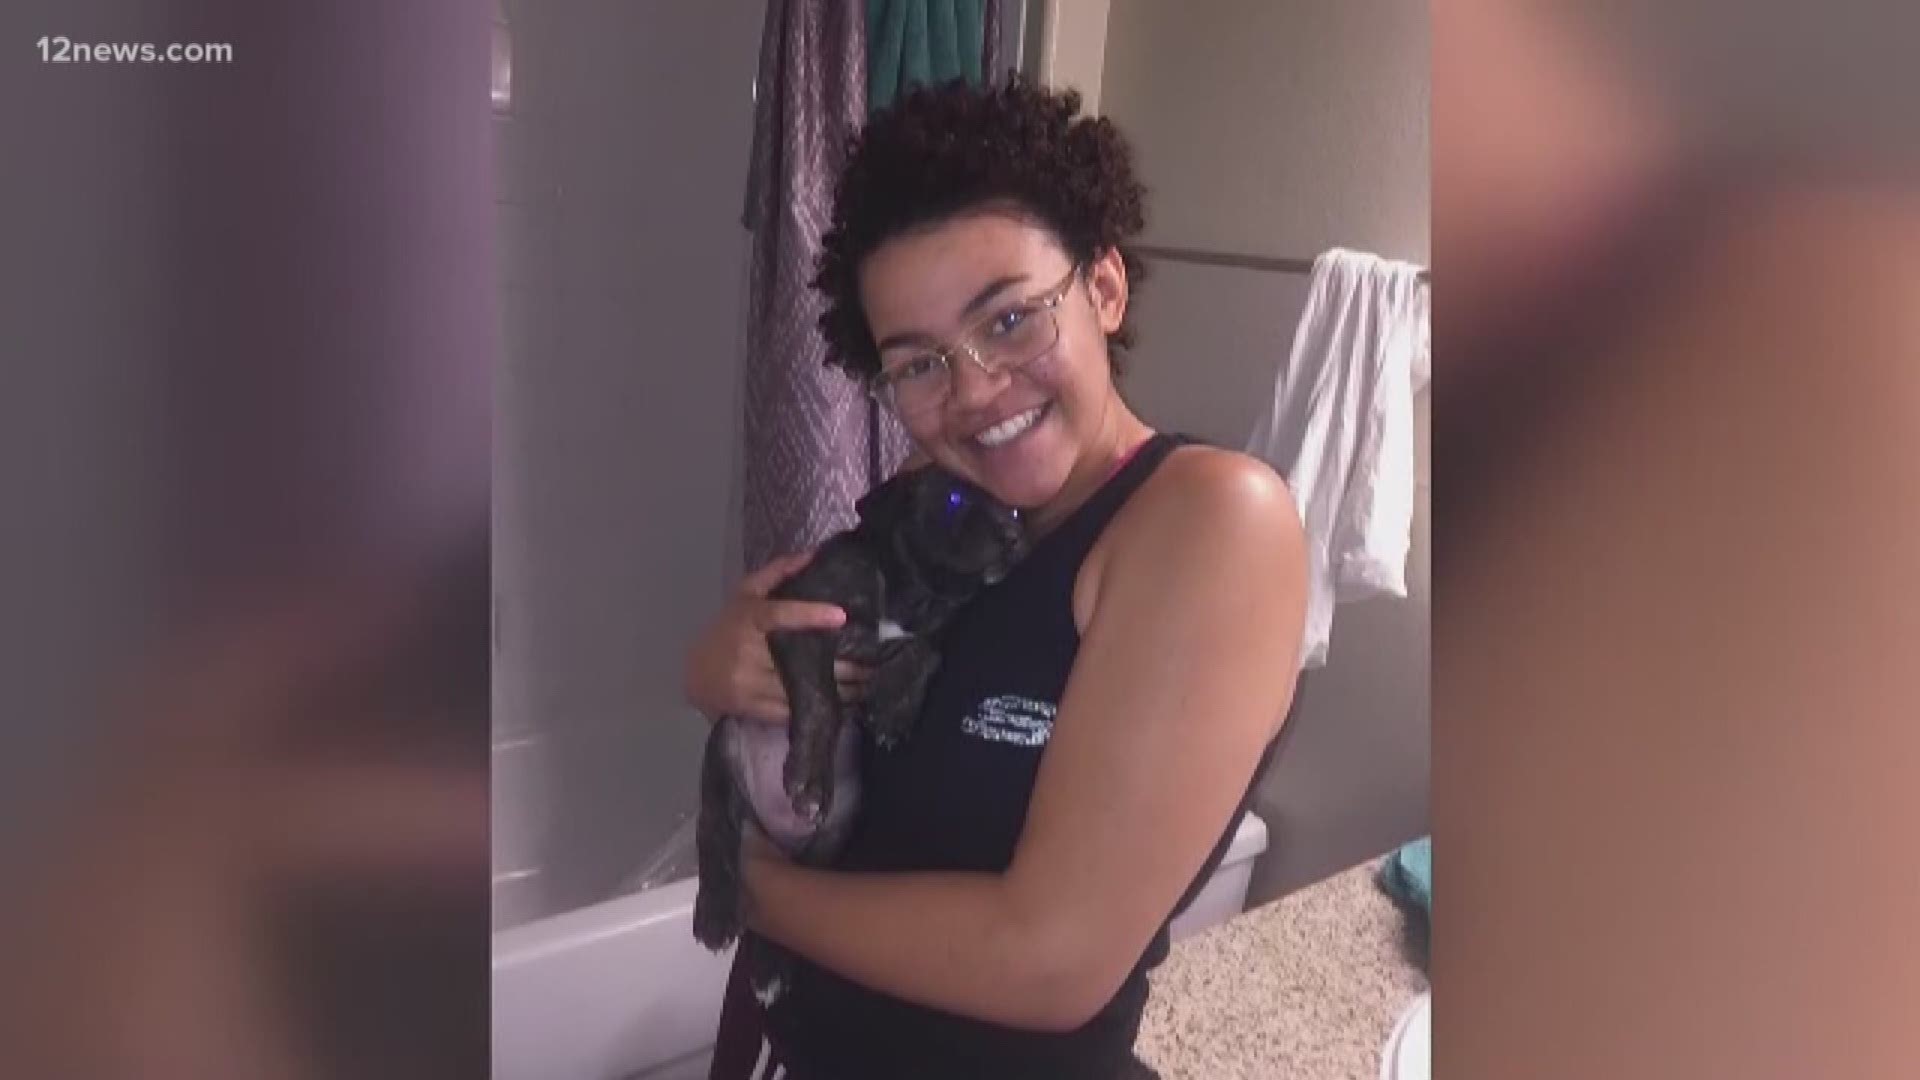 Police confirmed that a body found two days ago is that of missing teen Kiera Bergman. Her mother is now pleading for help in identifying her killer.